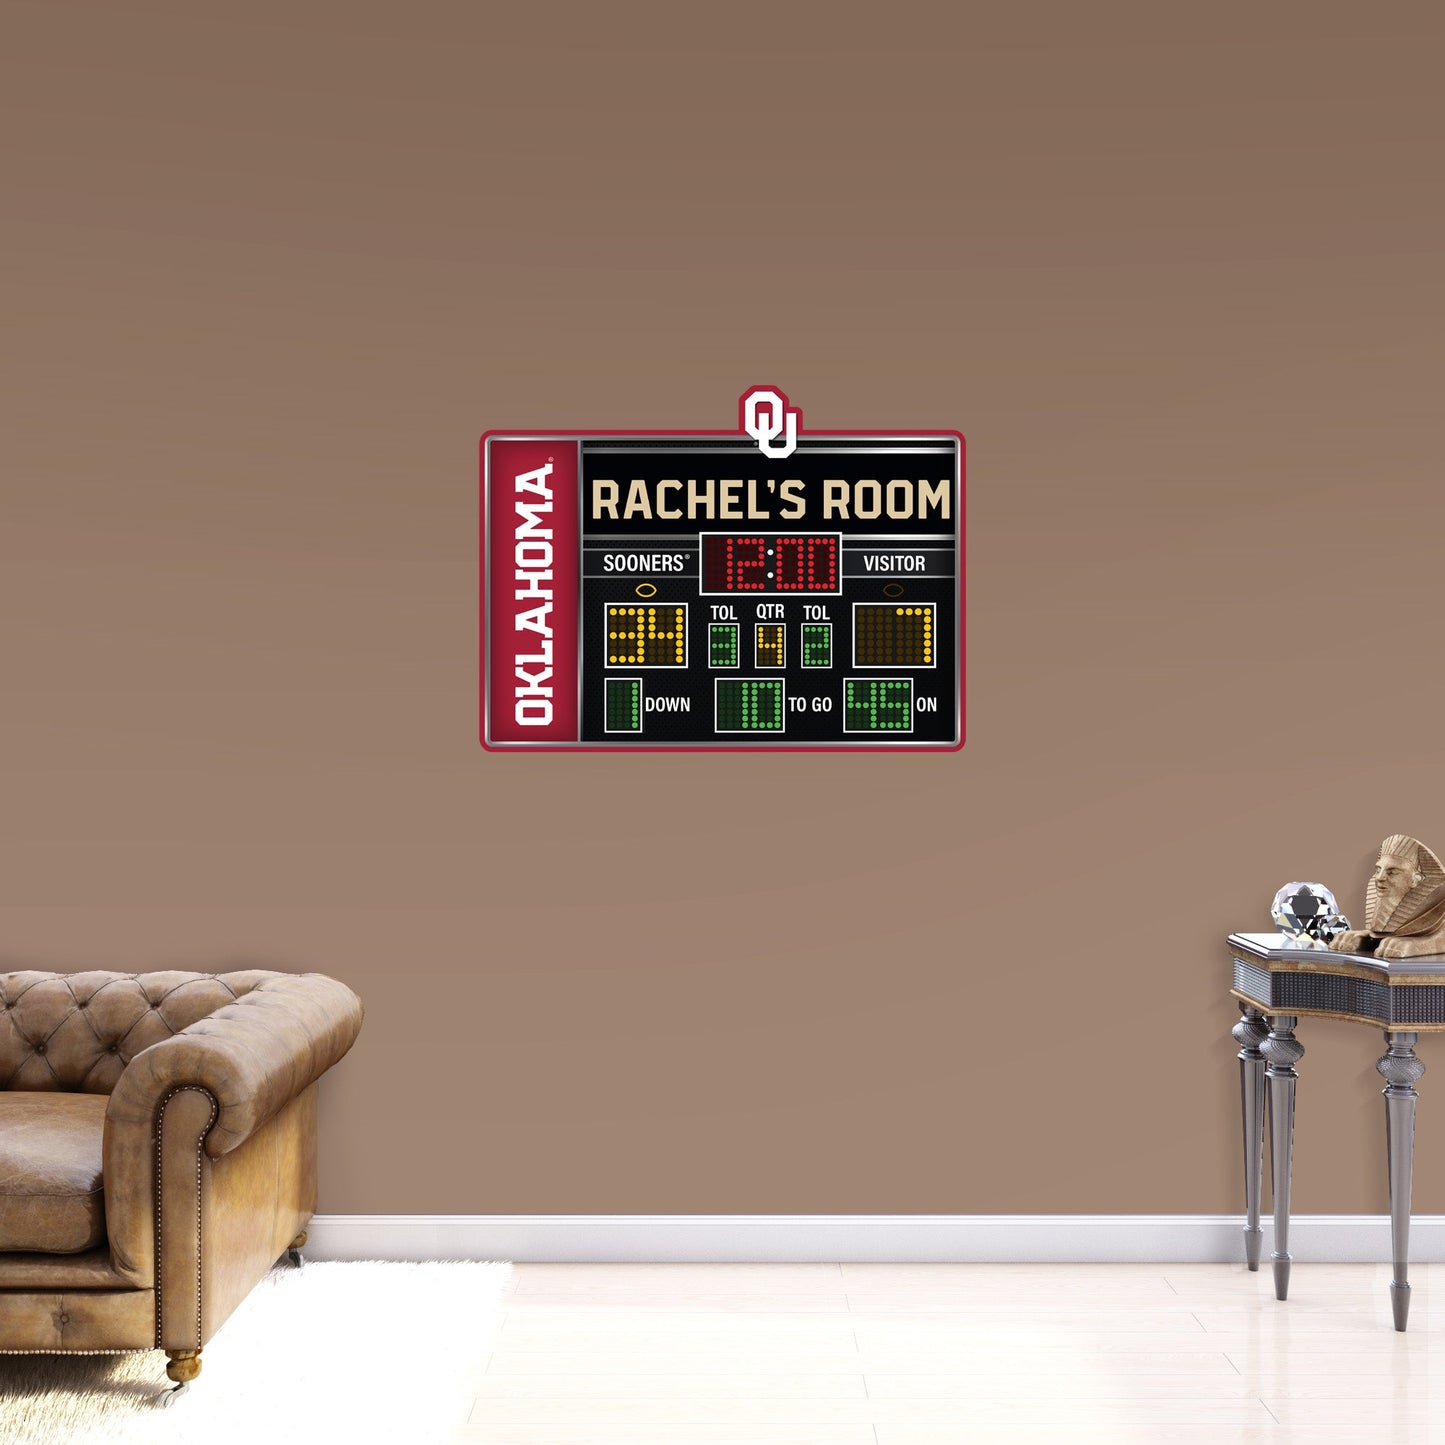 Oklahoma Sooners:   Football Scoreboard Personalized Name        - Officially Licensed NCAA Removable     Adhesive Decal